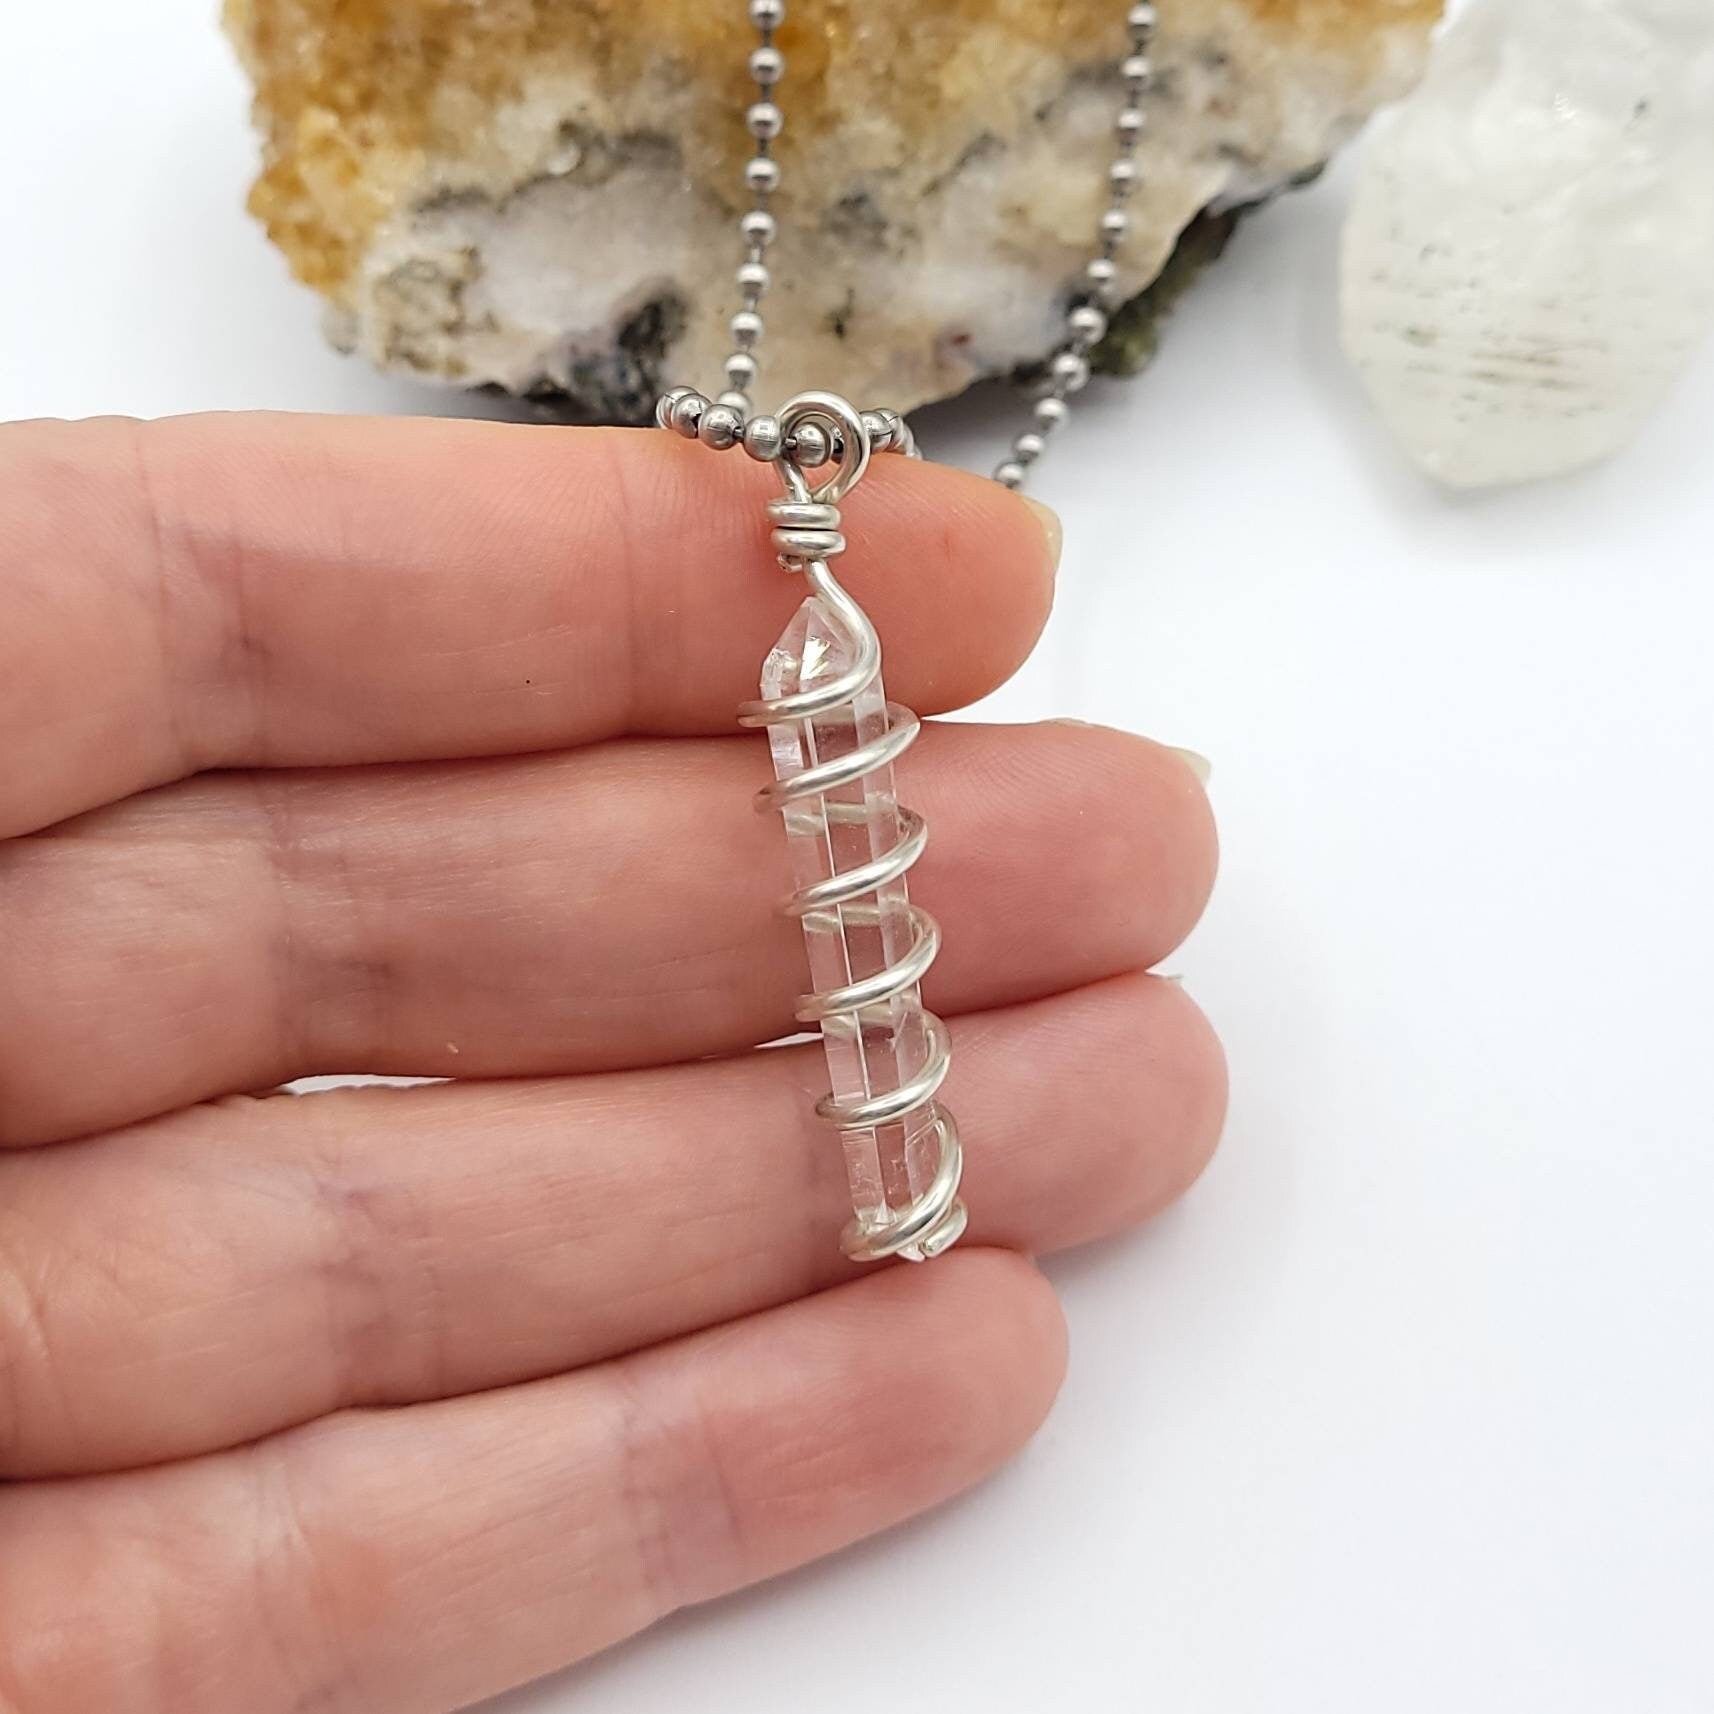 Lemurian Crystal Necklace, Wire Wrapped Lemurian Pendant